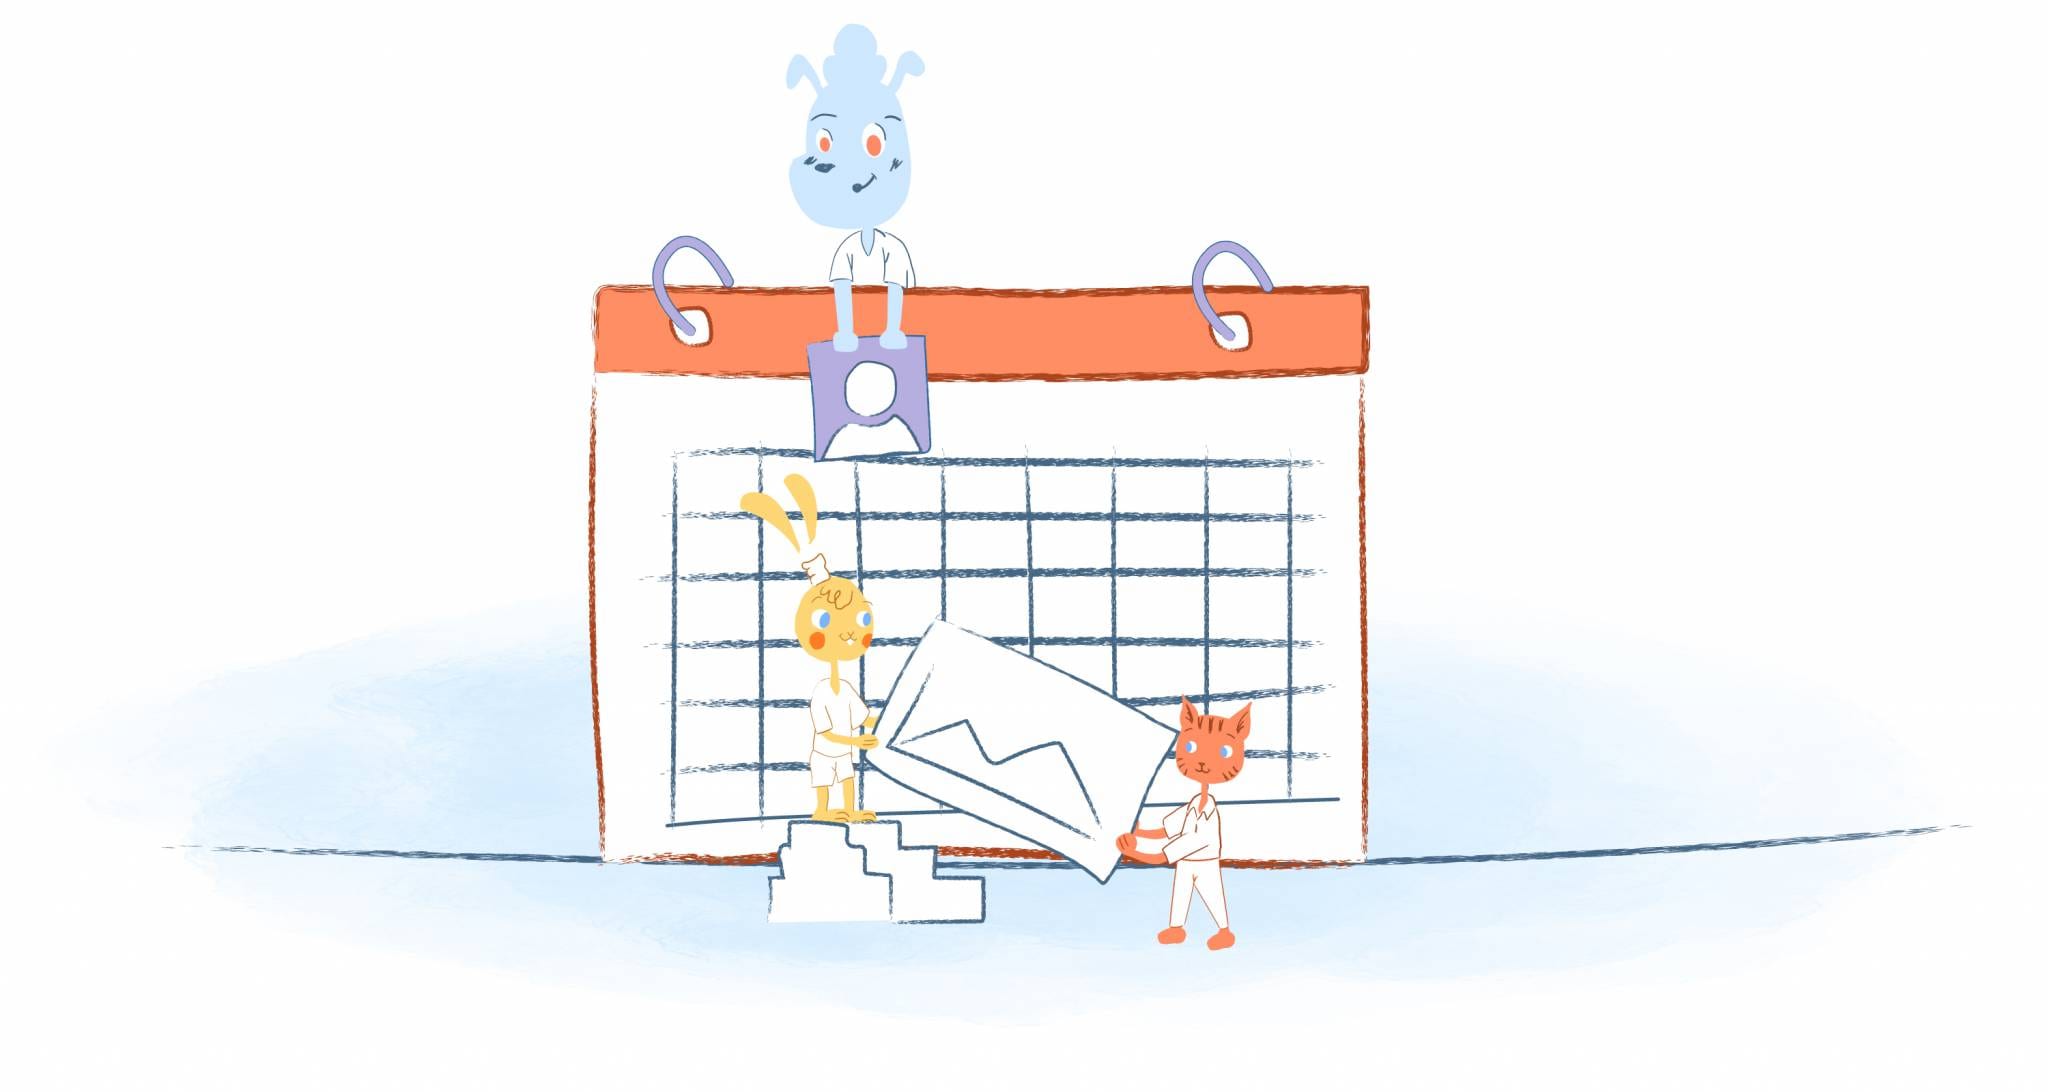 How to set goals and manage yourself